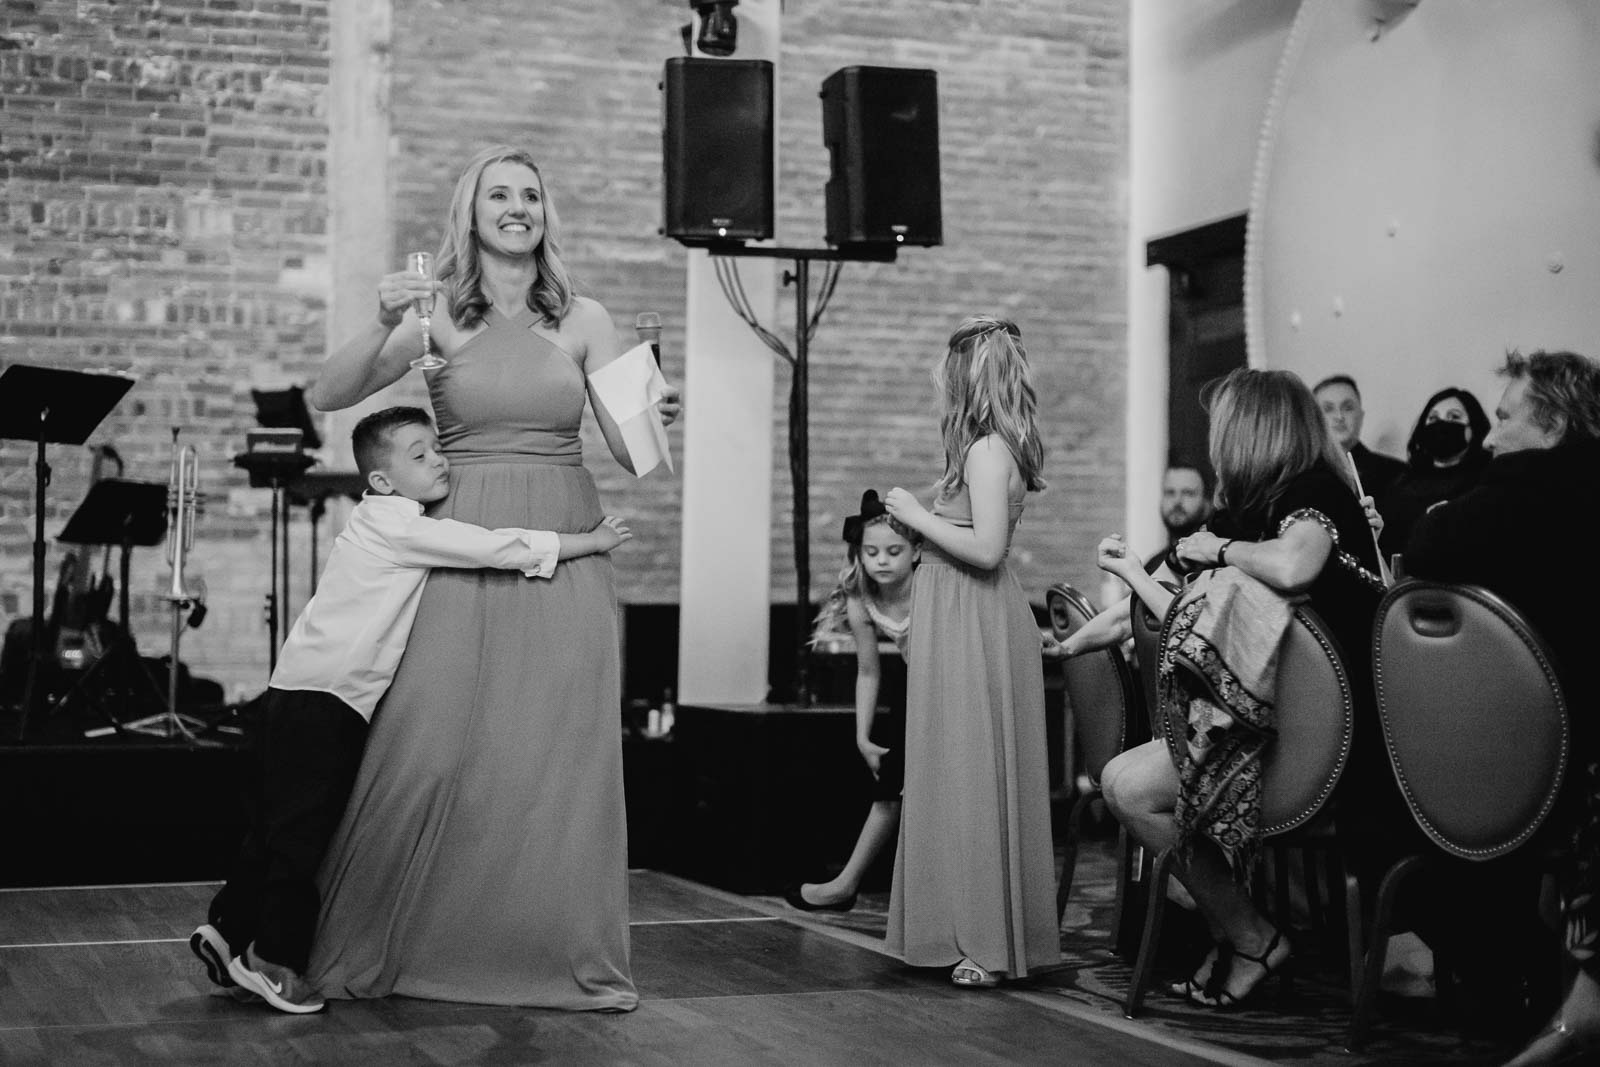 The sister of the bride makes her toast as her son hugs her